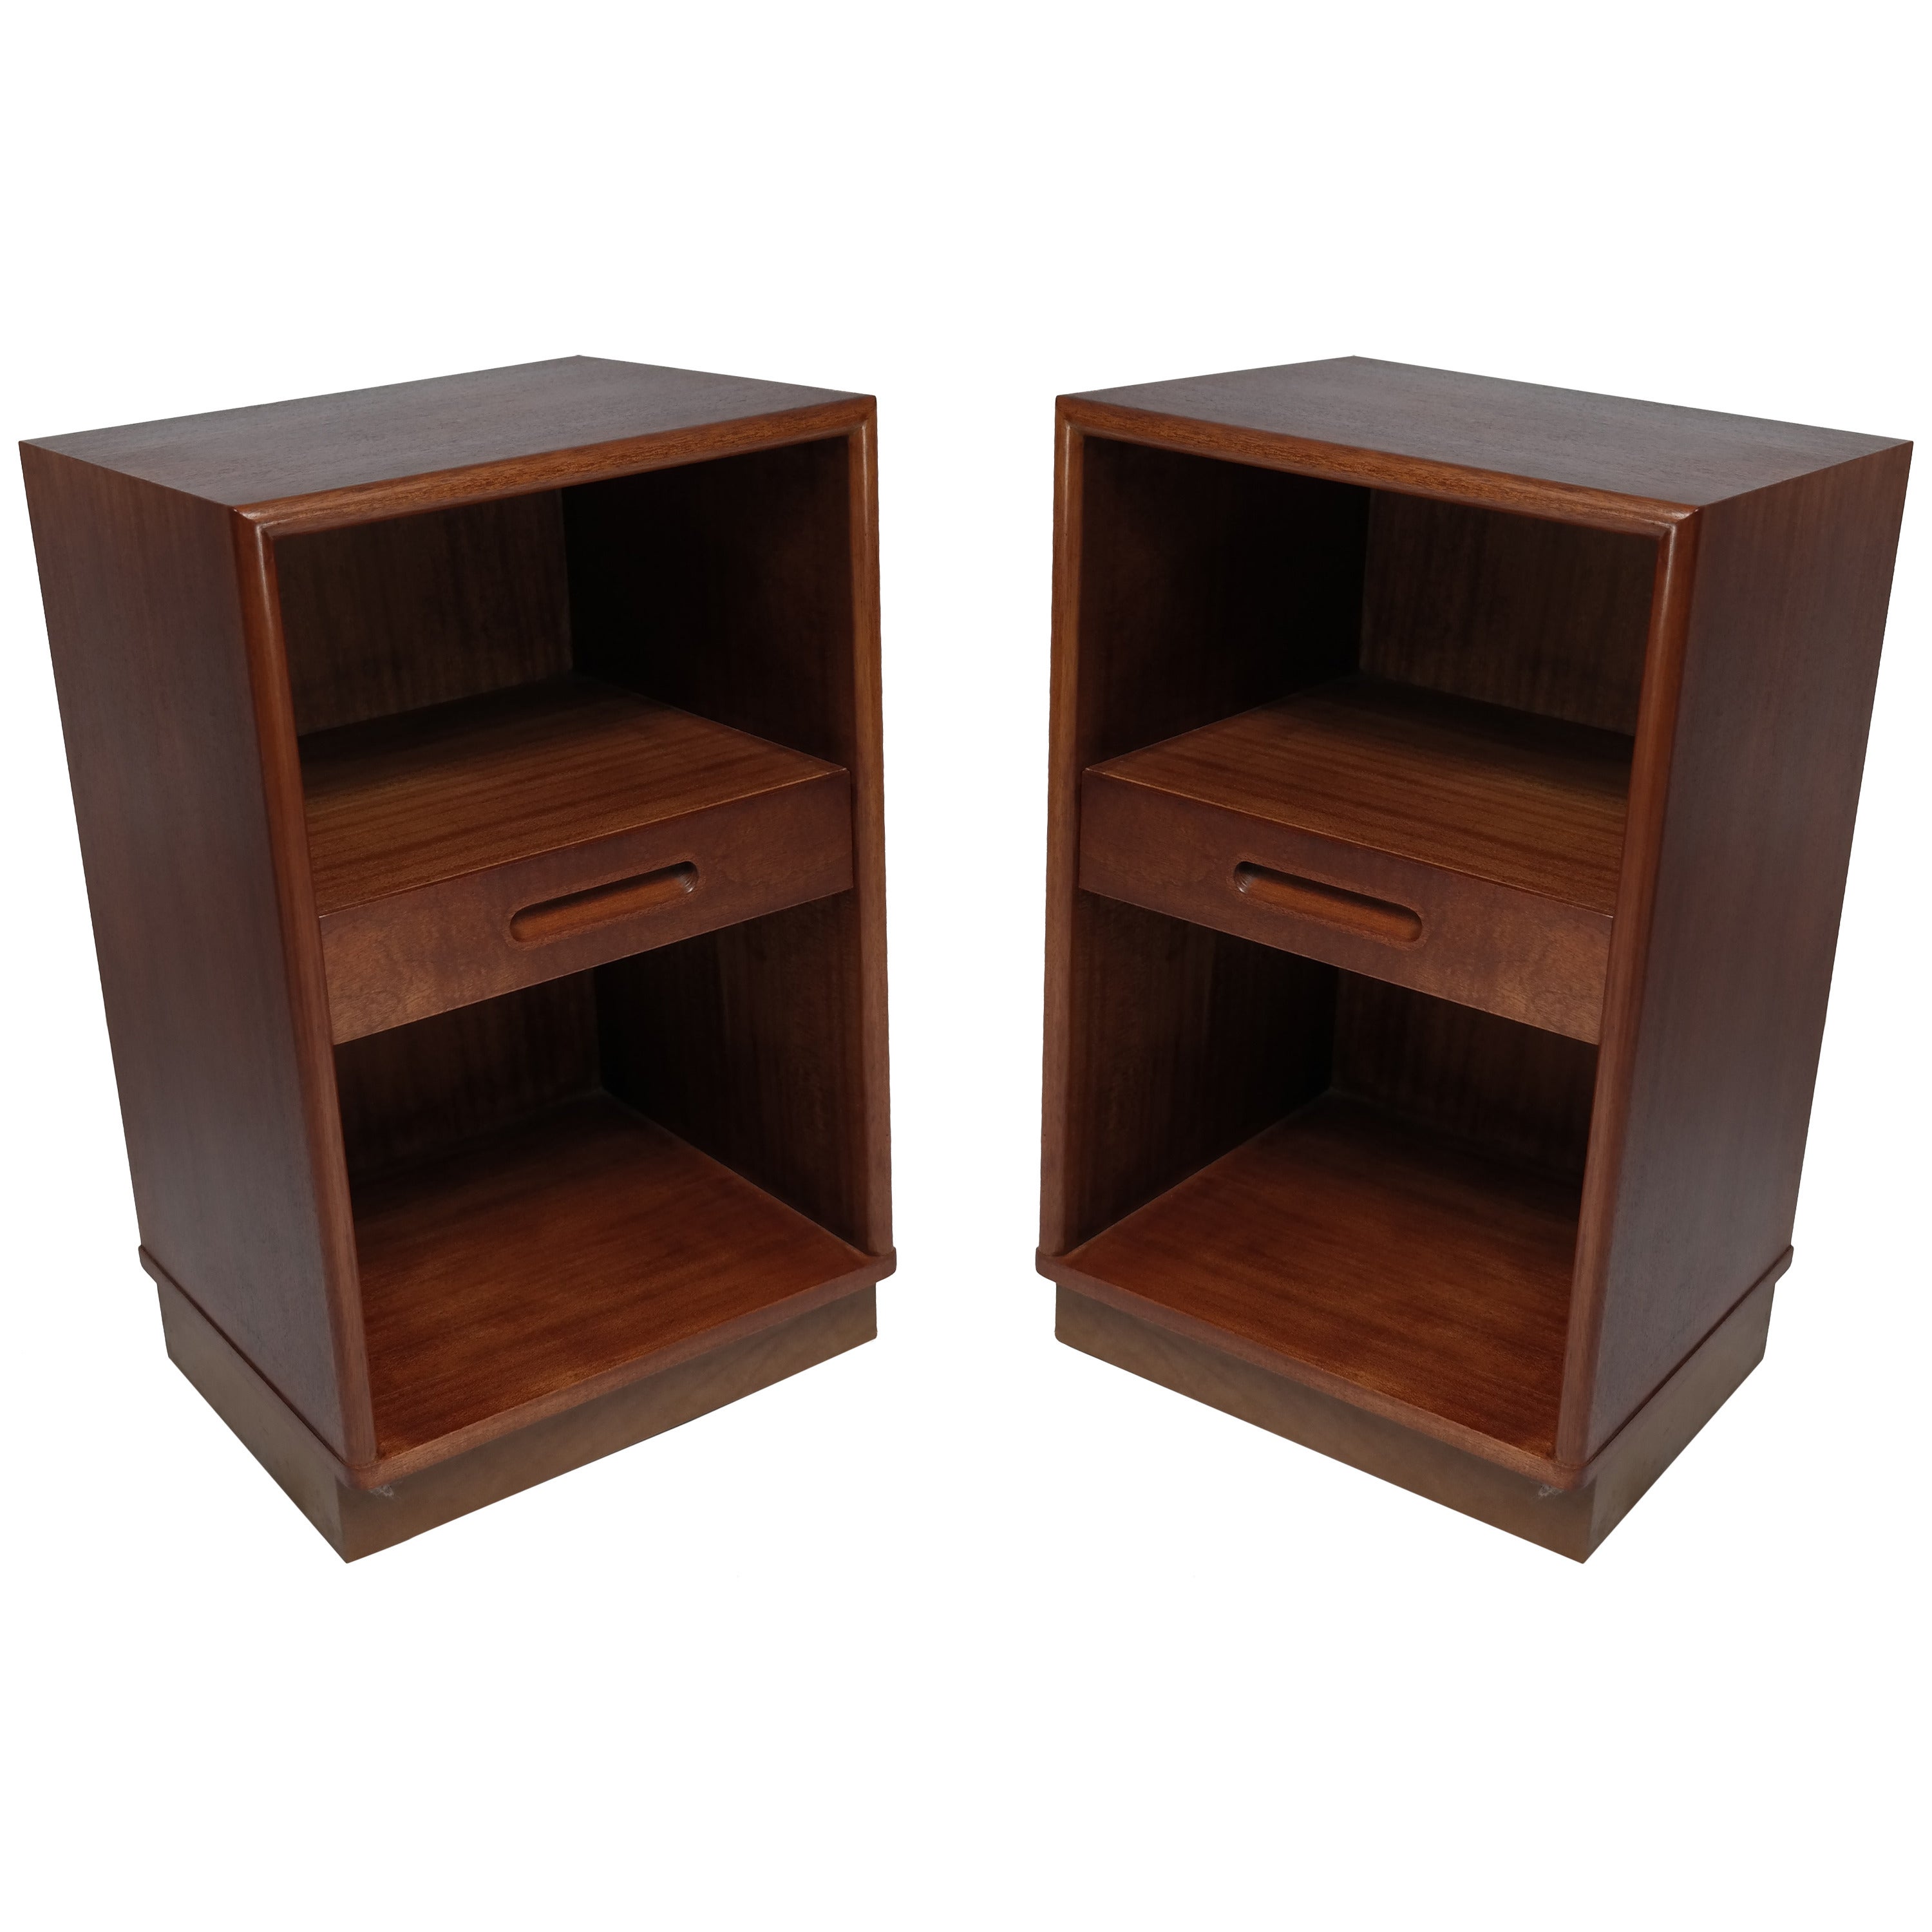 Bedside Cabinets by Edward Wormley for Dunbar